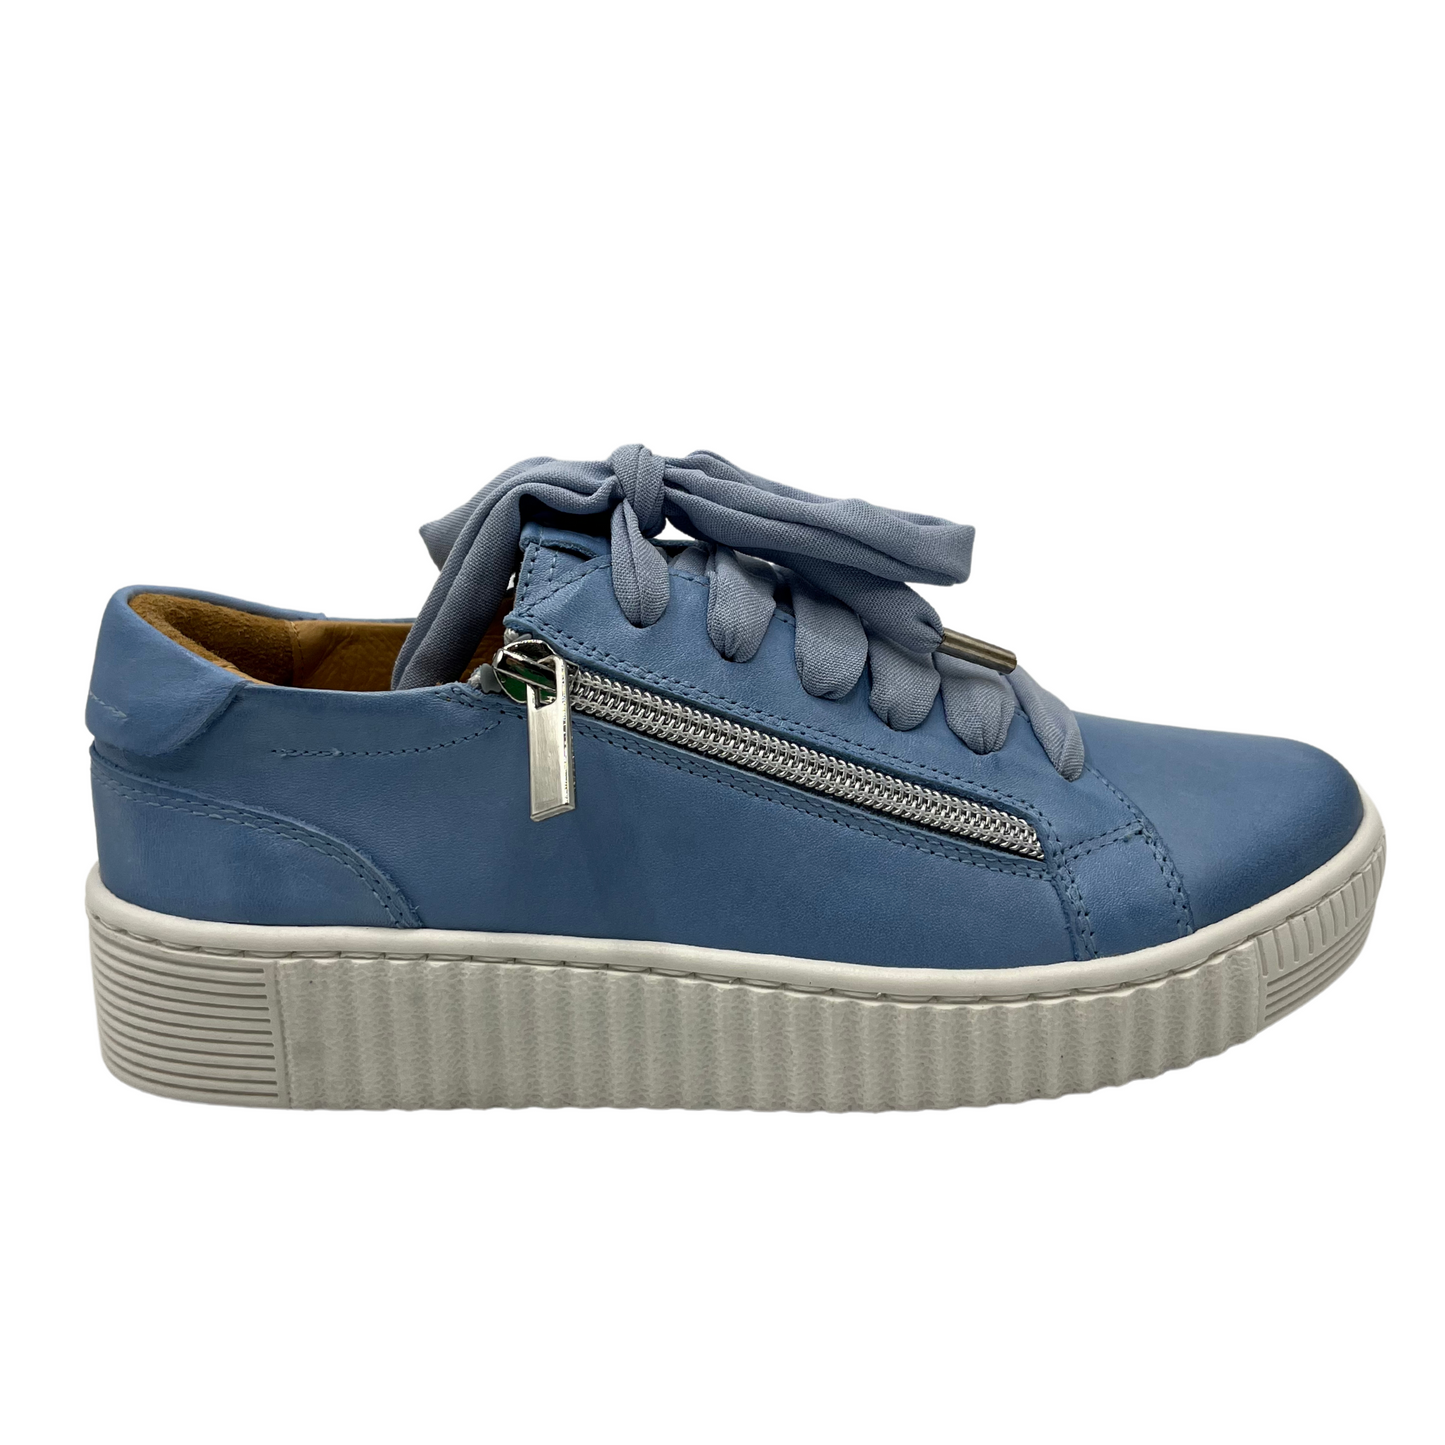 Right facing view of blue leather sneaker with white rubber outsole